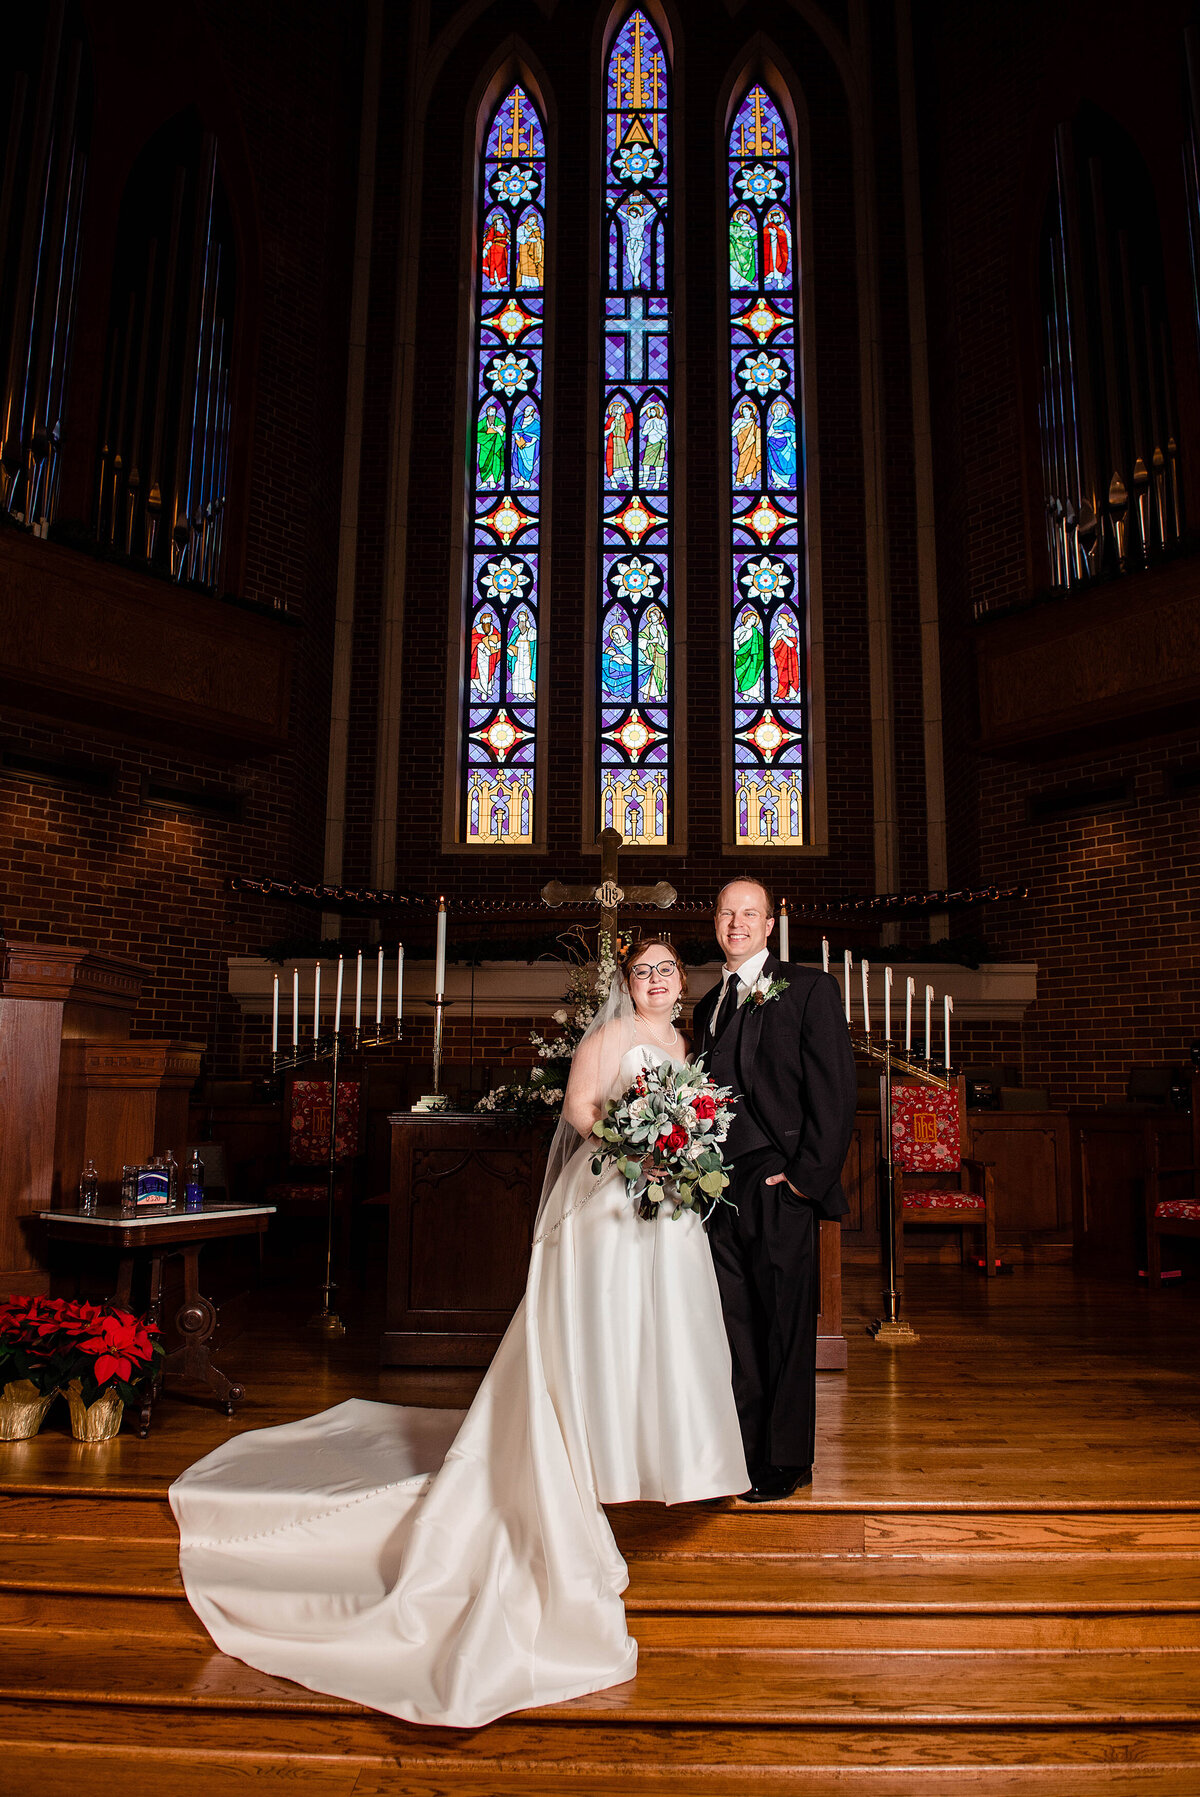 Formal photo of bride and groom standing at church alter with stained glass behind them